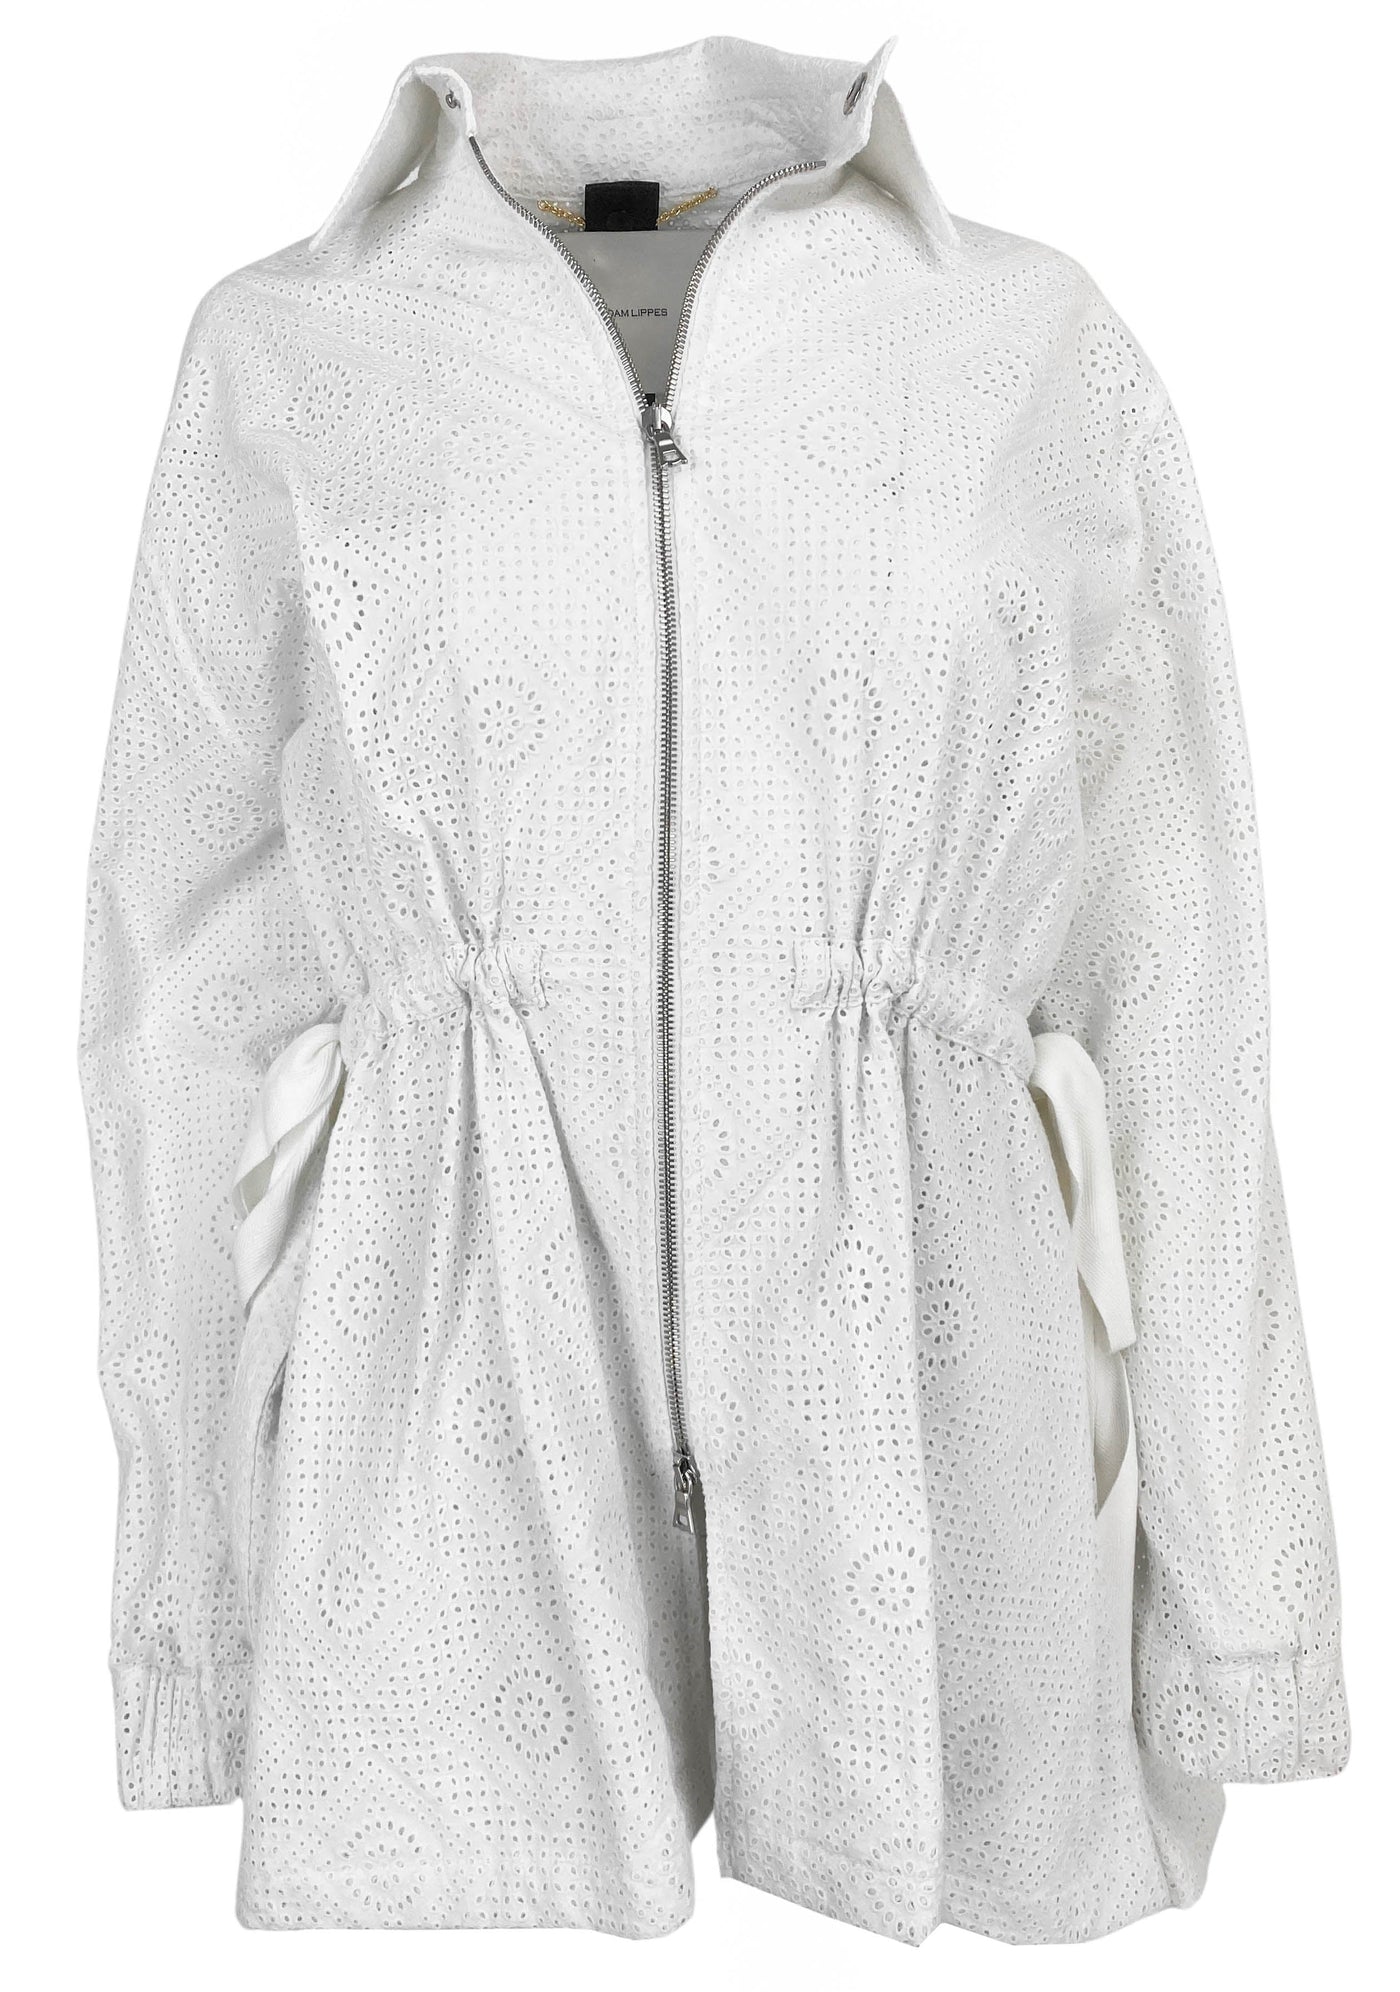 Adam Lippes Anorak Jacket in White Eyelet - Discounts on Adam Lippes at UAL